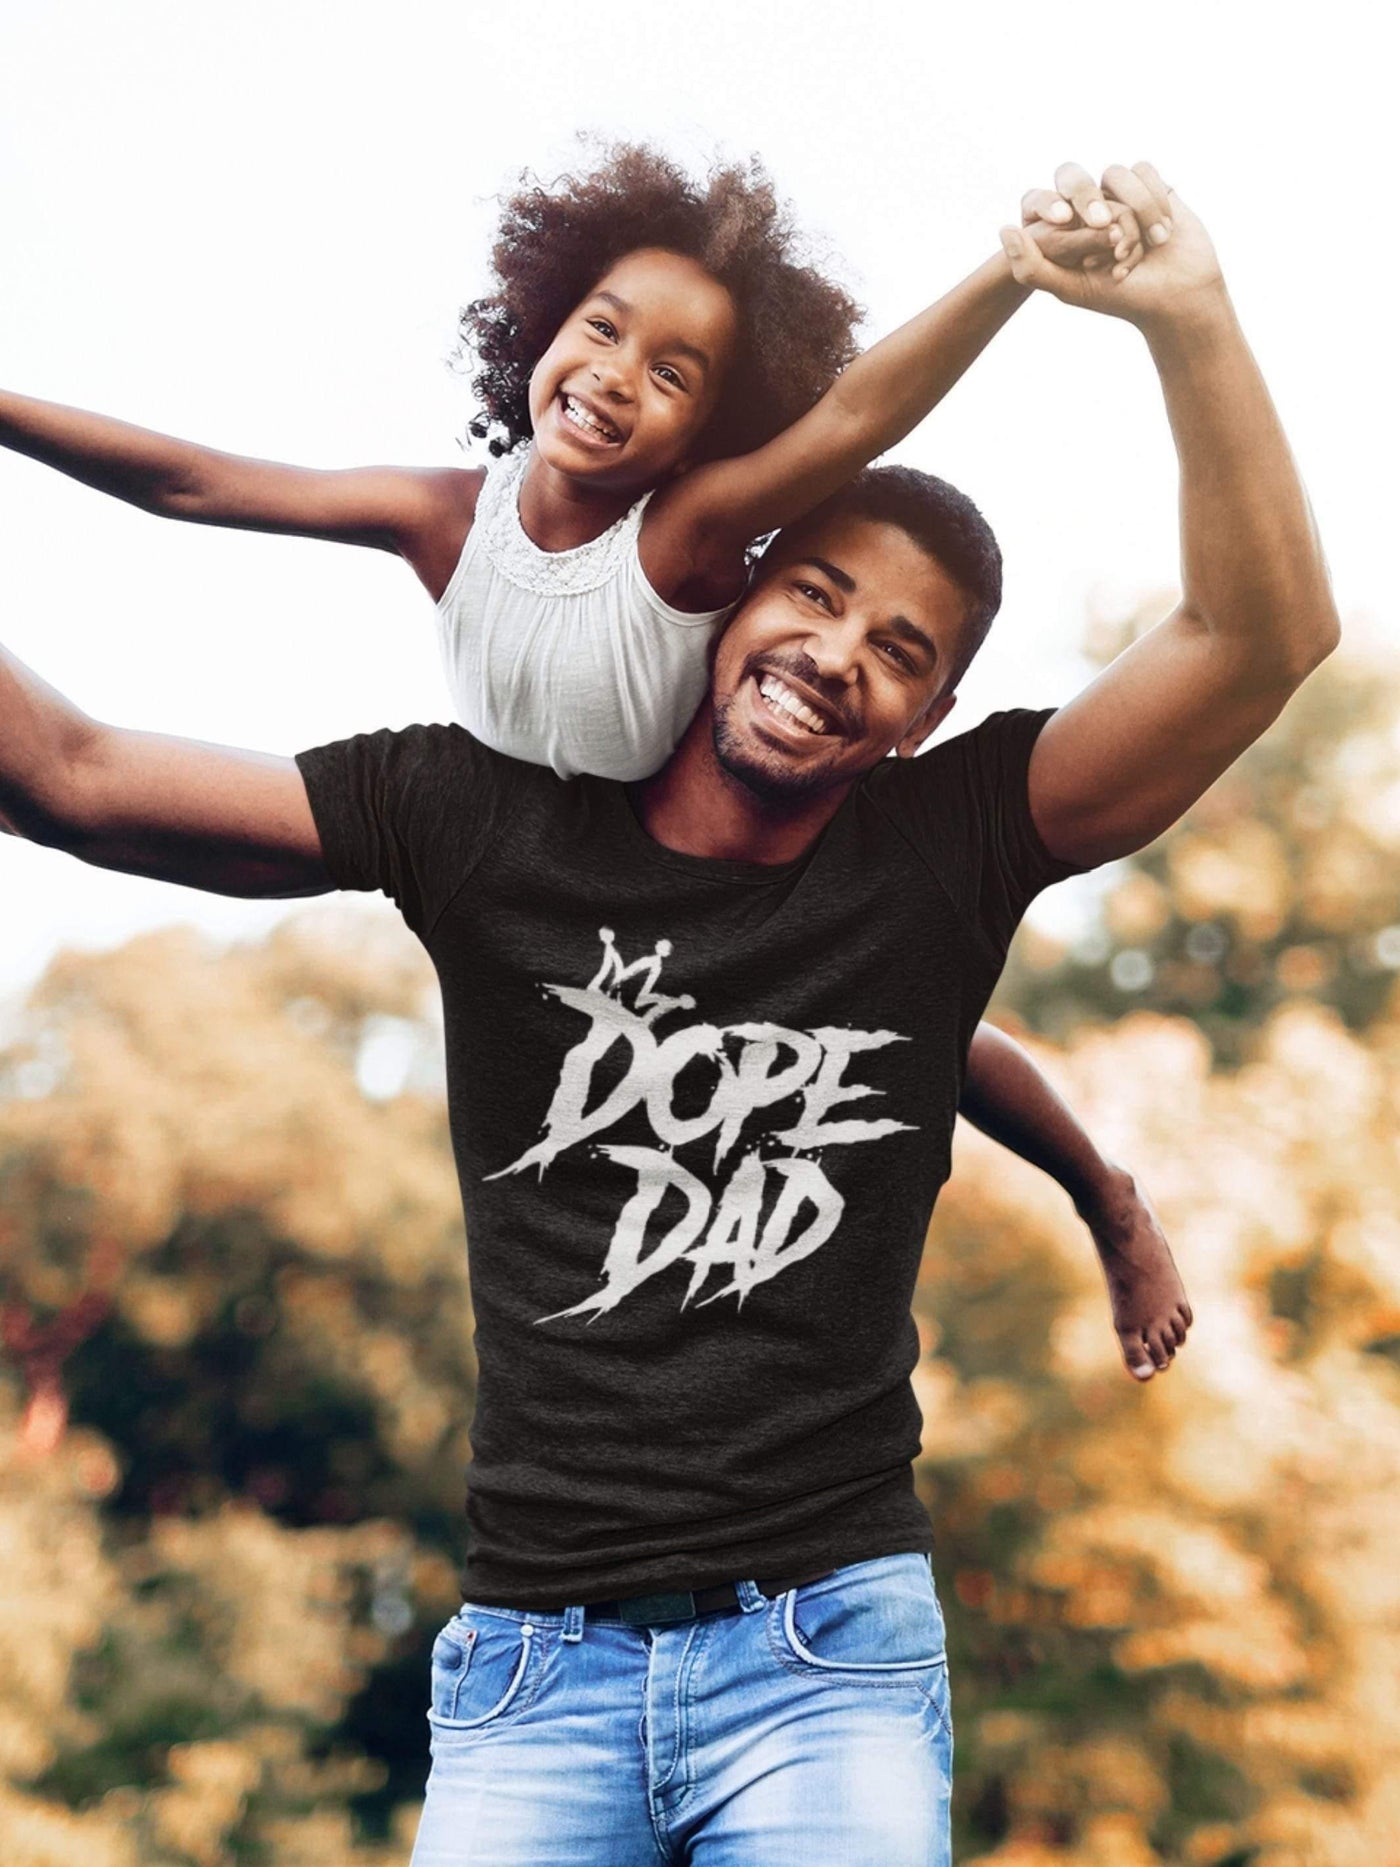 Dope Dad Tee | White Graphic - Statement Piece NY Black, Dad, Dope dad, Father, Father's Day, Gift, Gifts for dad, Kelly, King, Navy, not clearance, Royal, Ships from USA, SPNY Exclusive, Statement Piece NY, Statement Tees, T-shirts, True Royal, X-Large, XL 